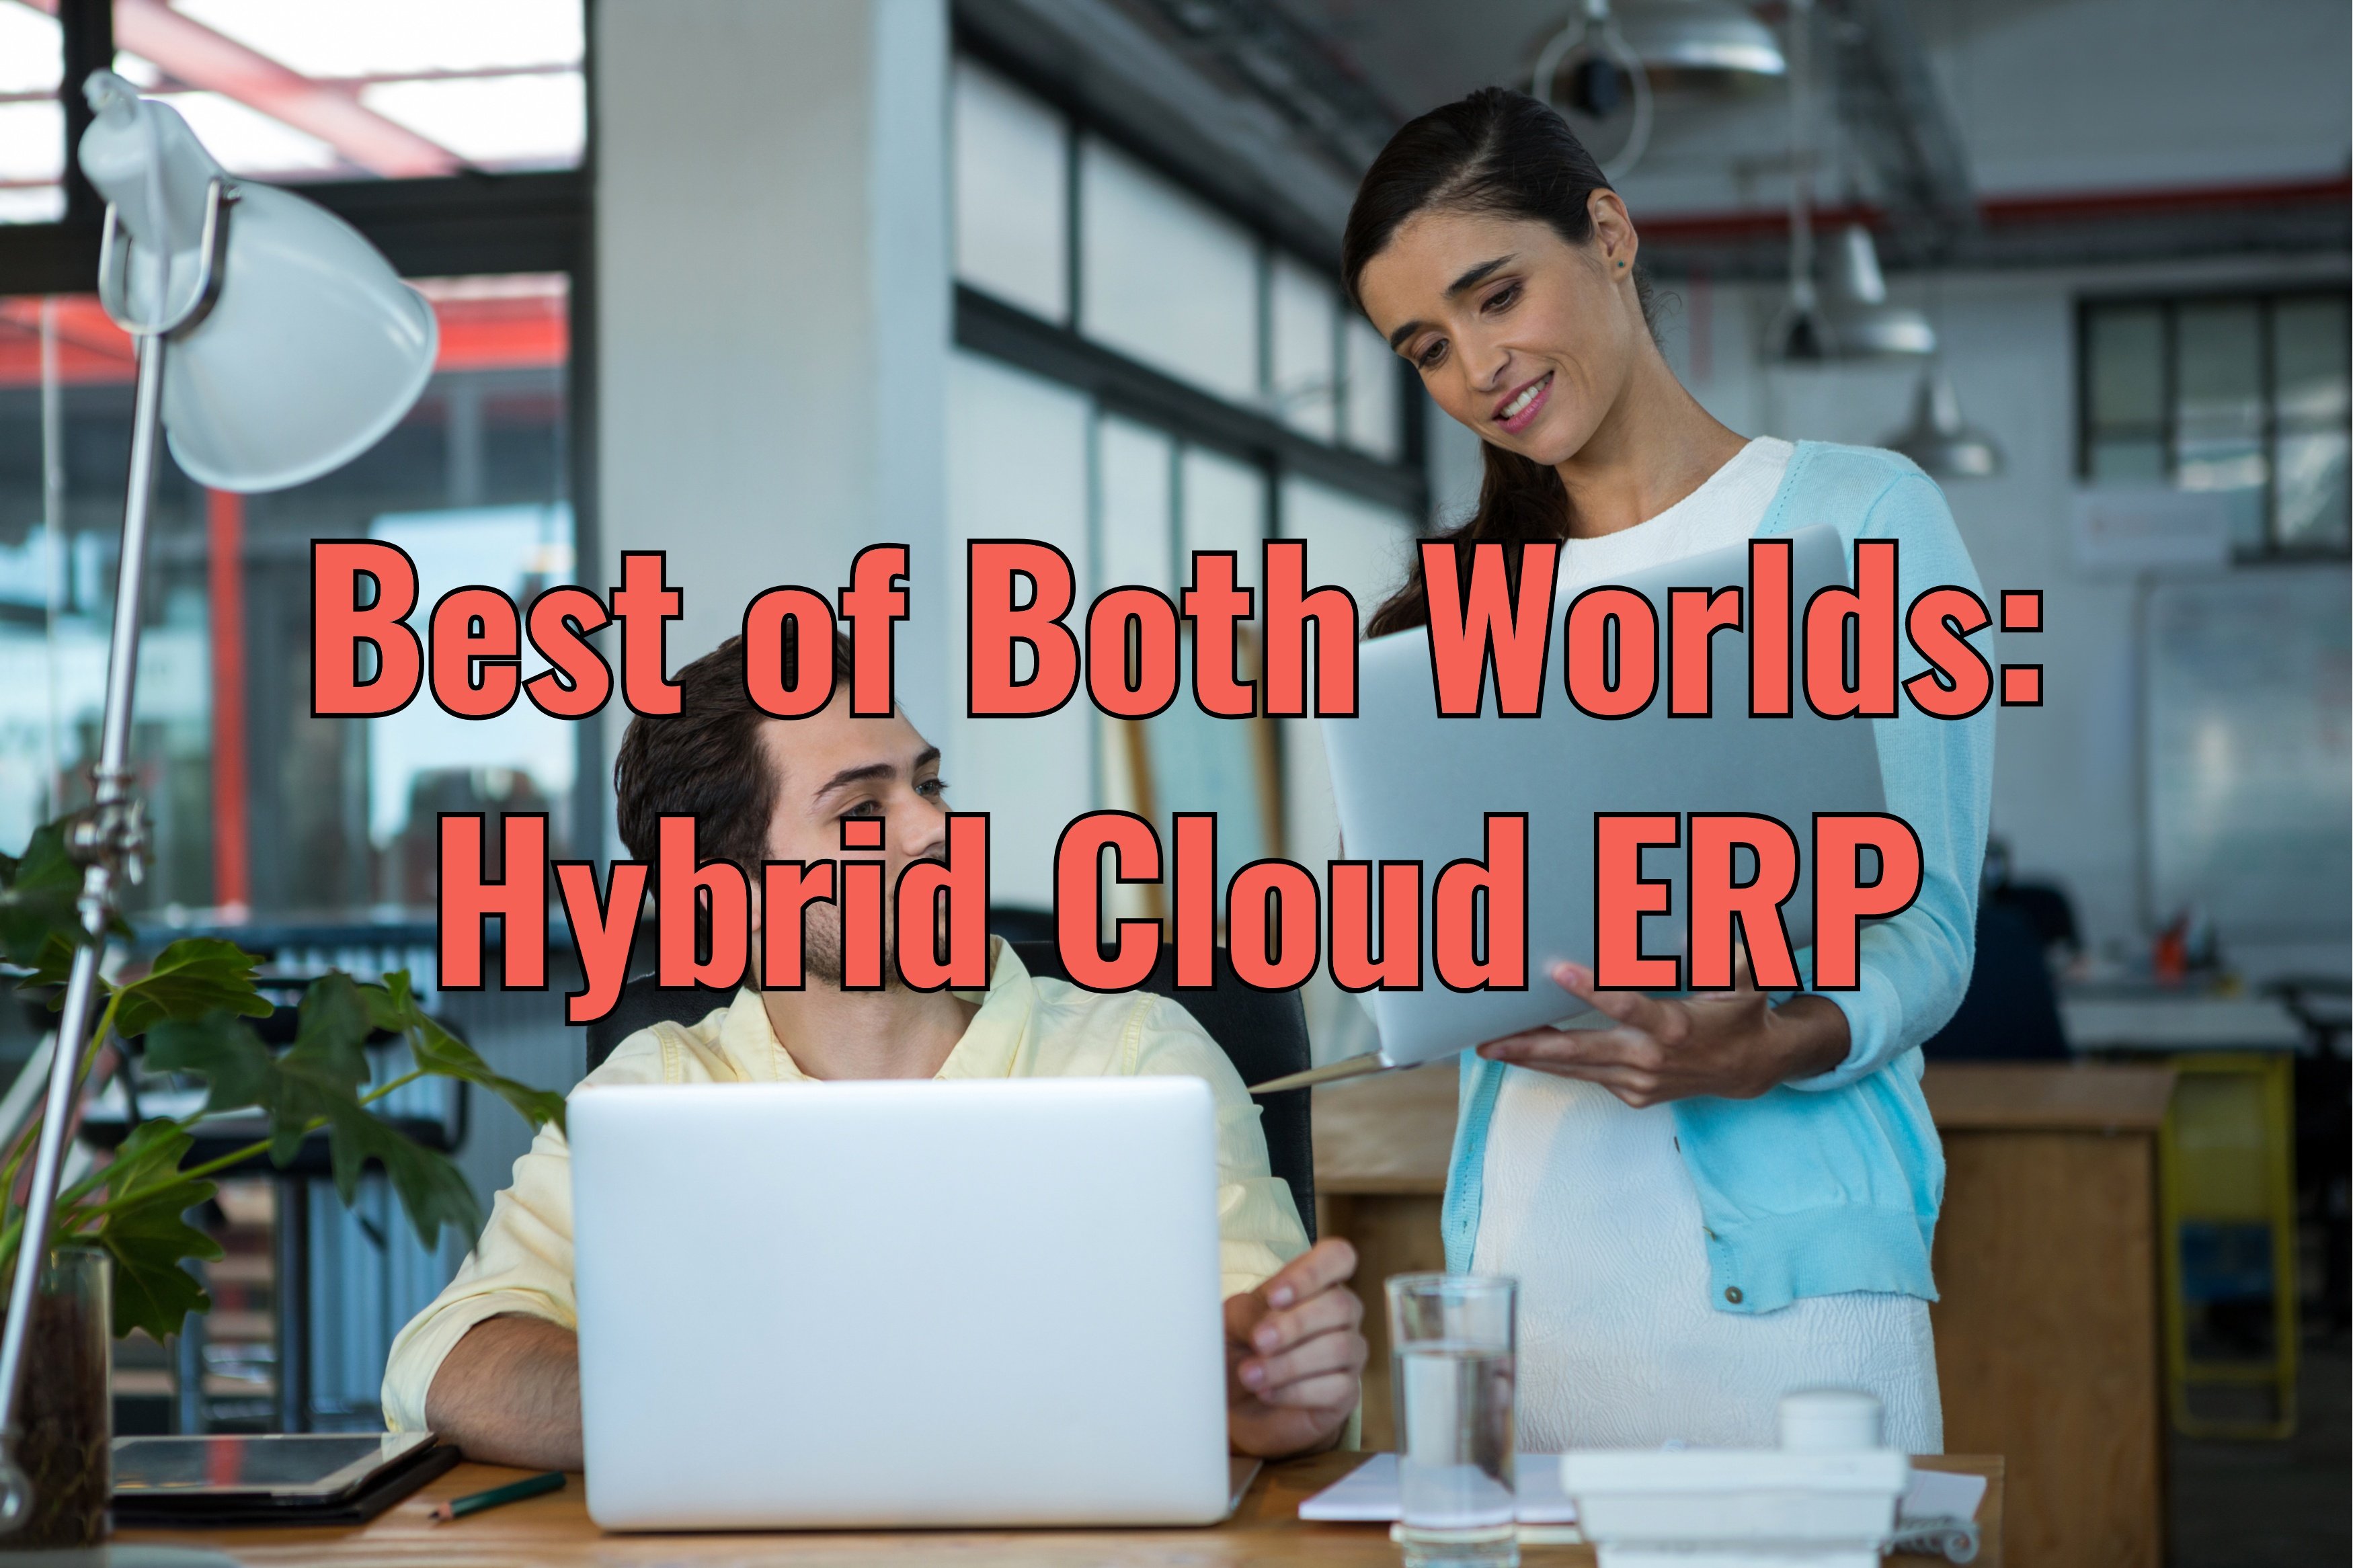 Get the Best of Both Worlds with Hybrid Cloud ERP